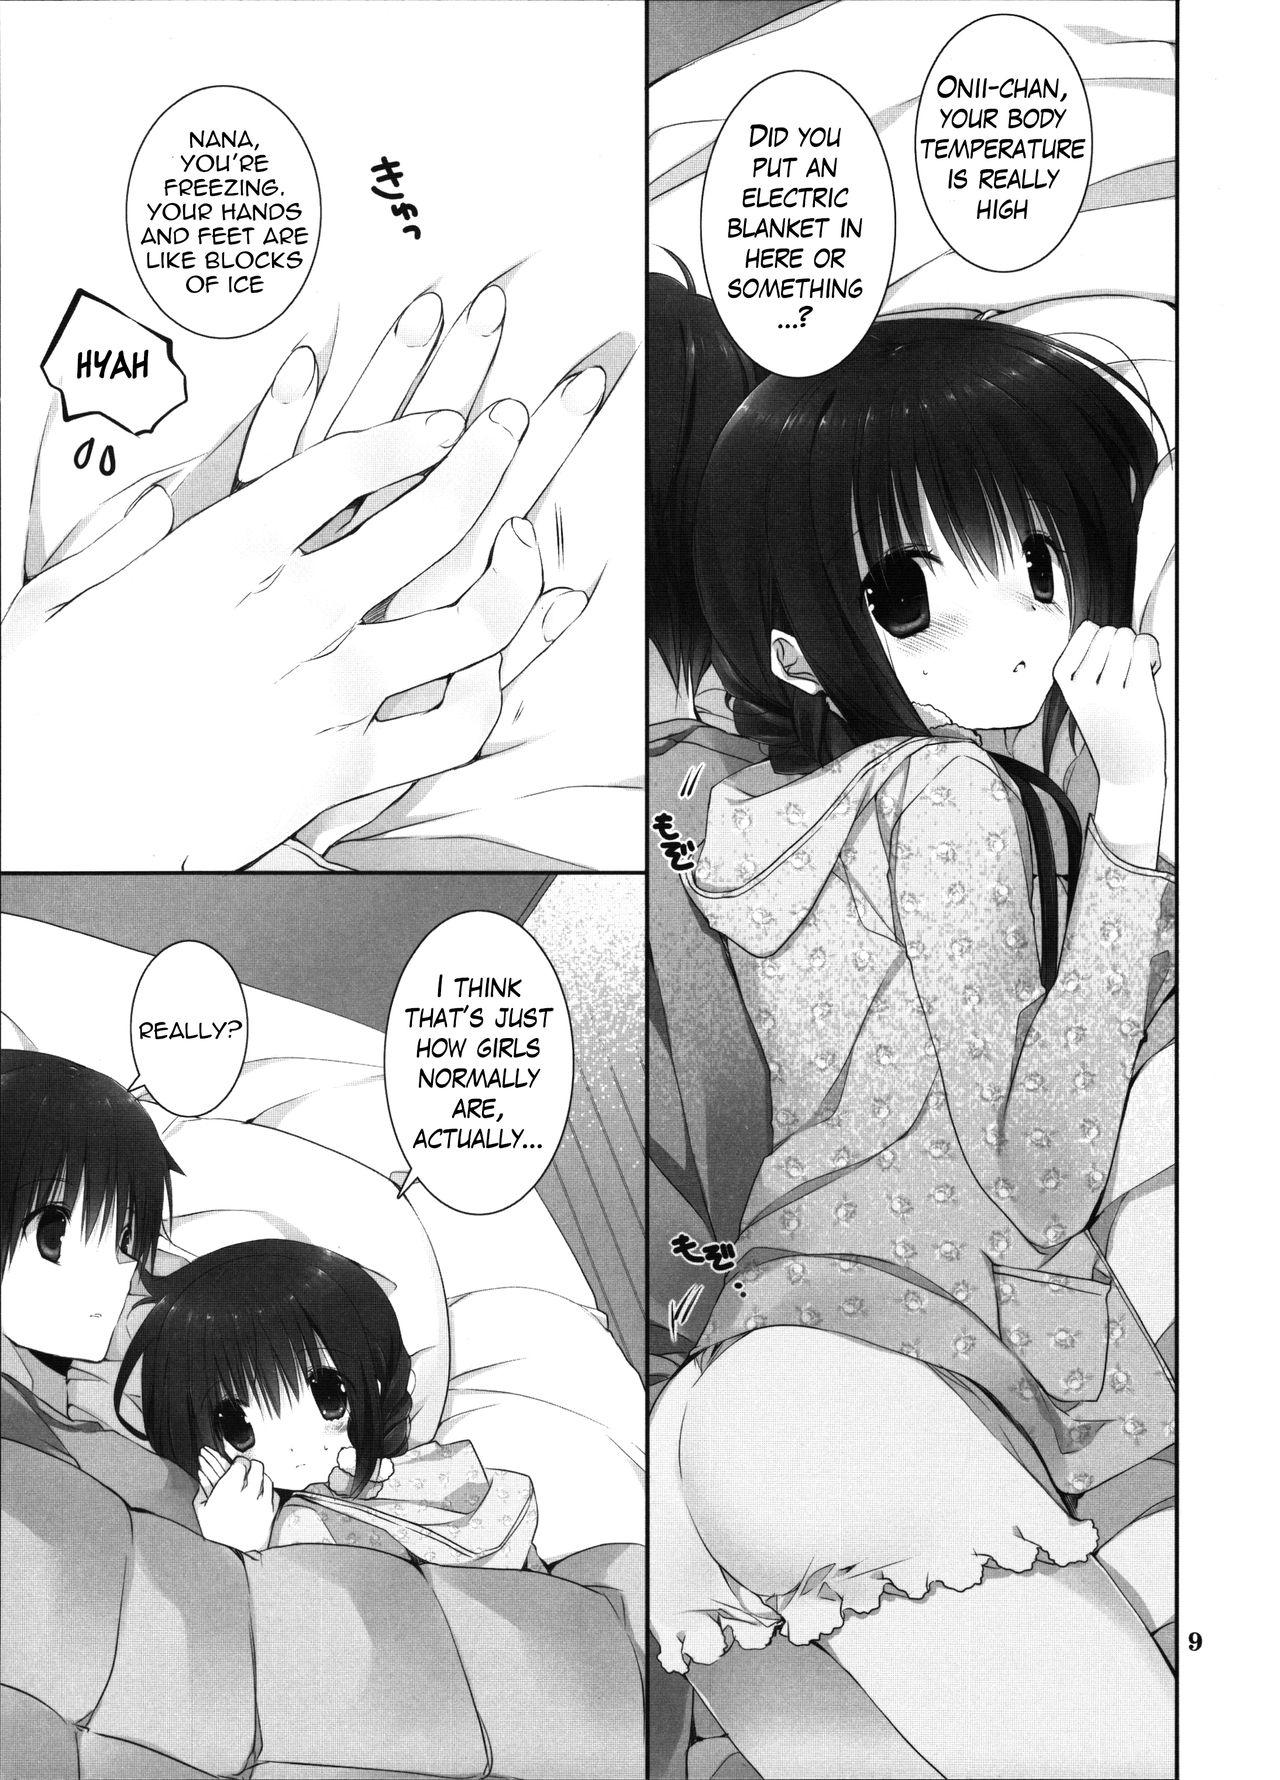 Mask Imouto no Otetsudai 8 | Little Sister Helper 8 Lovers - Page 8